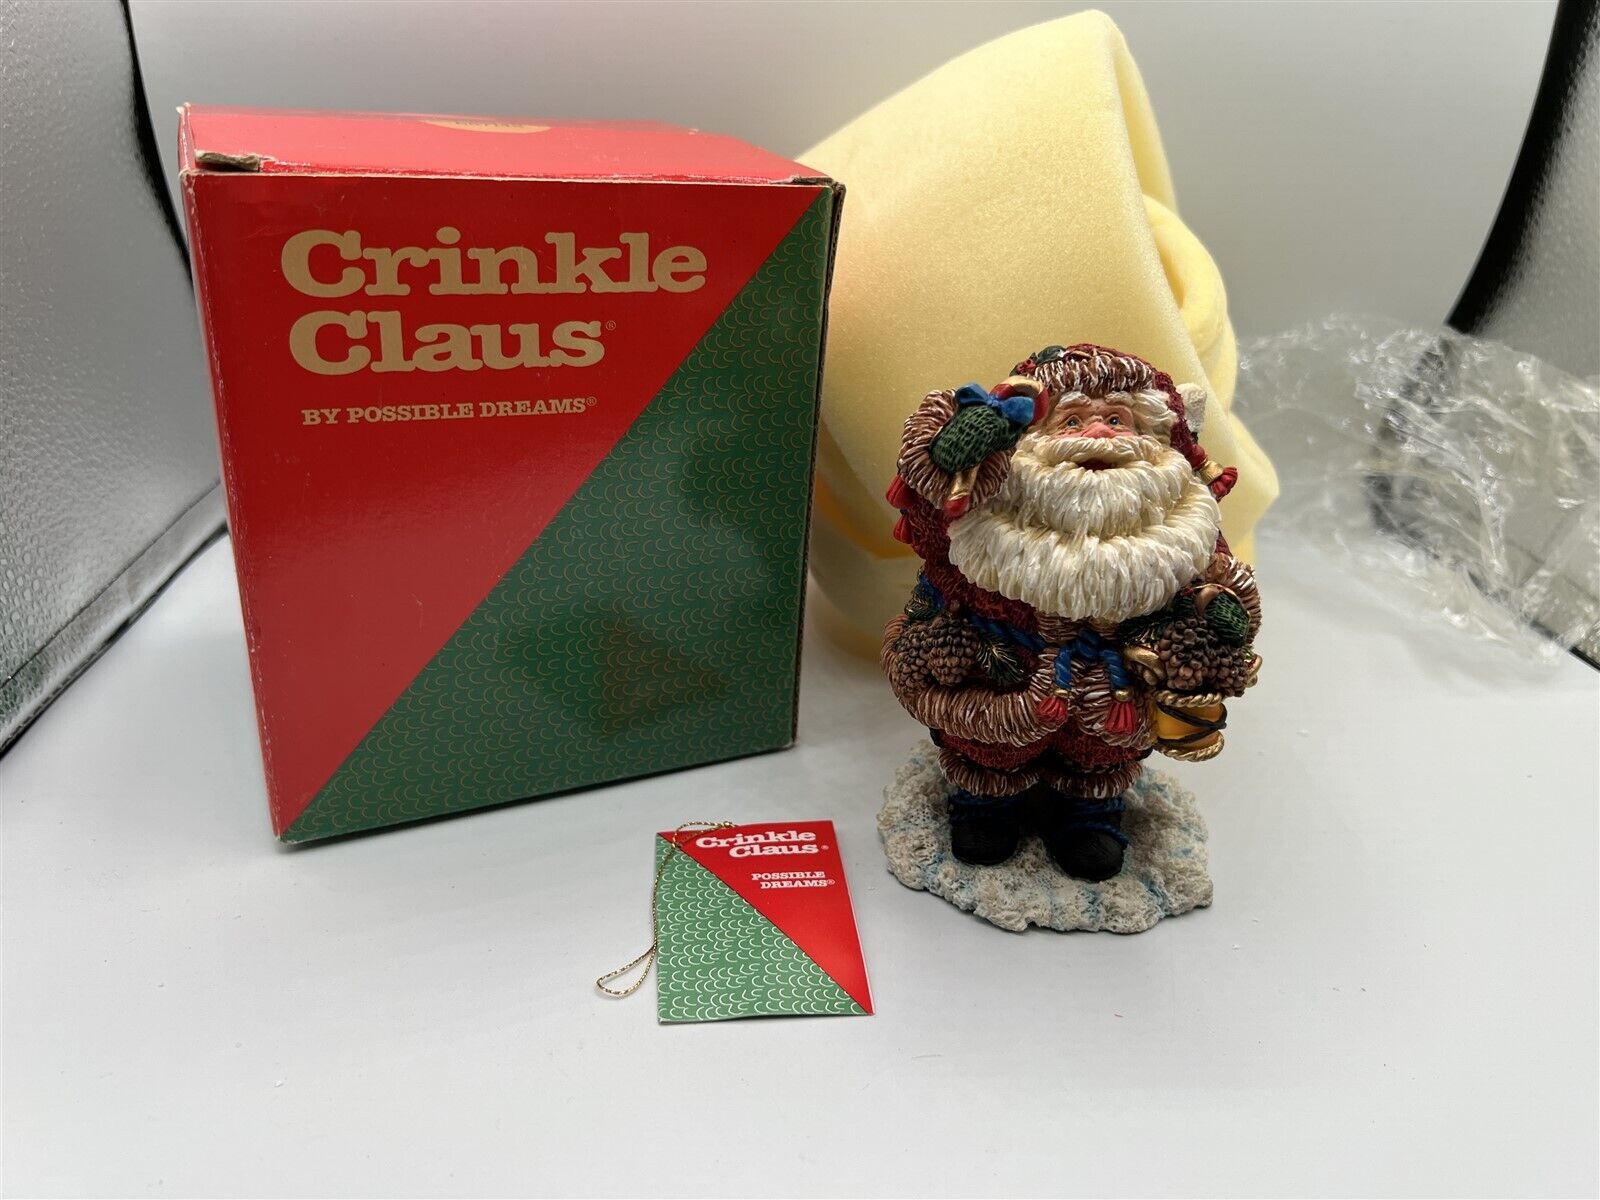 CRINKLE CLAUS SANTA WITH CANDY CANE 557142 POSSIBLE DREAMS